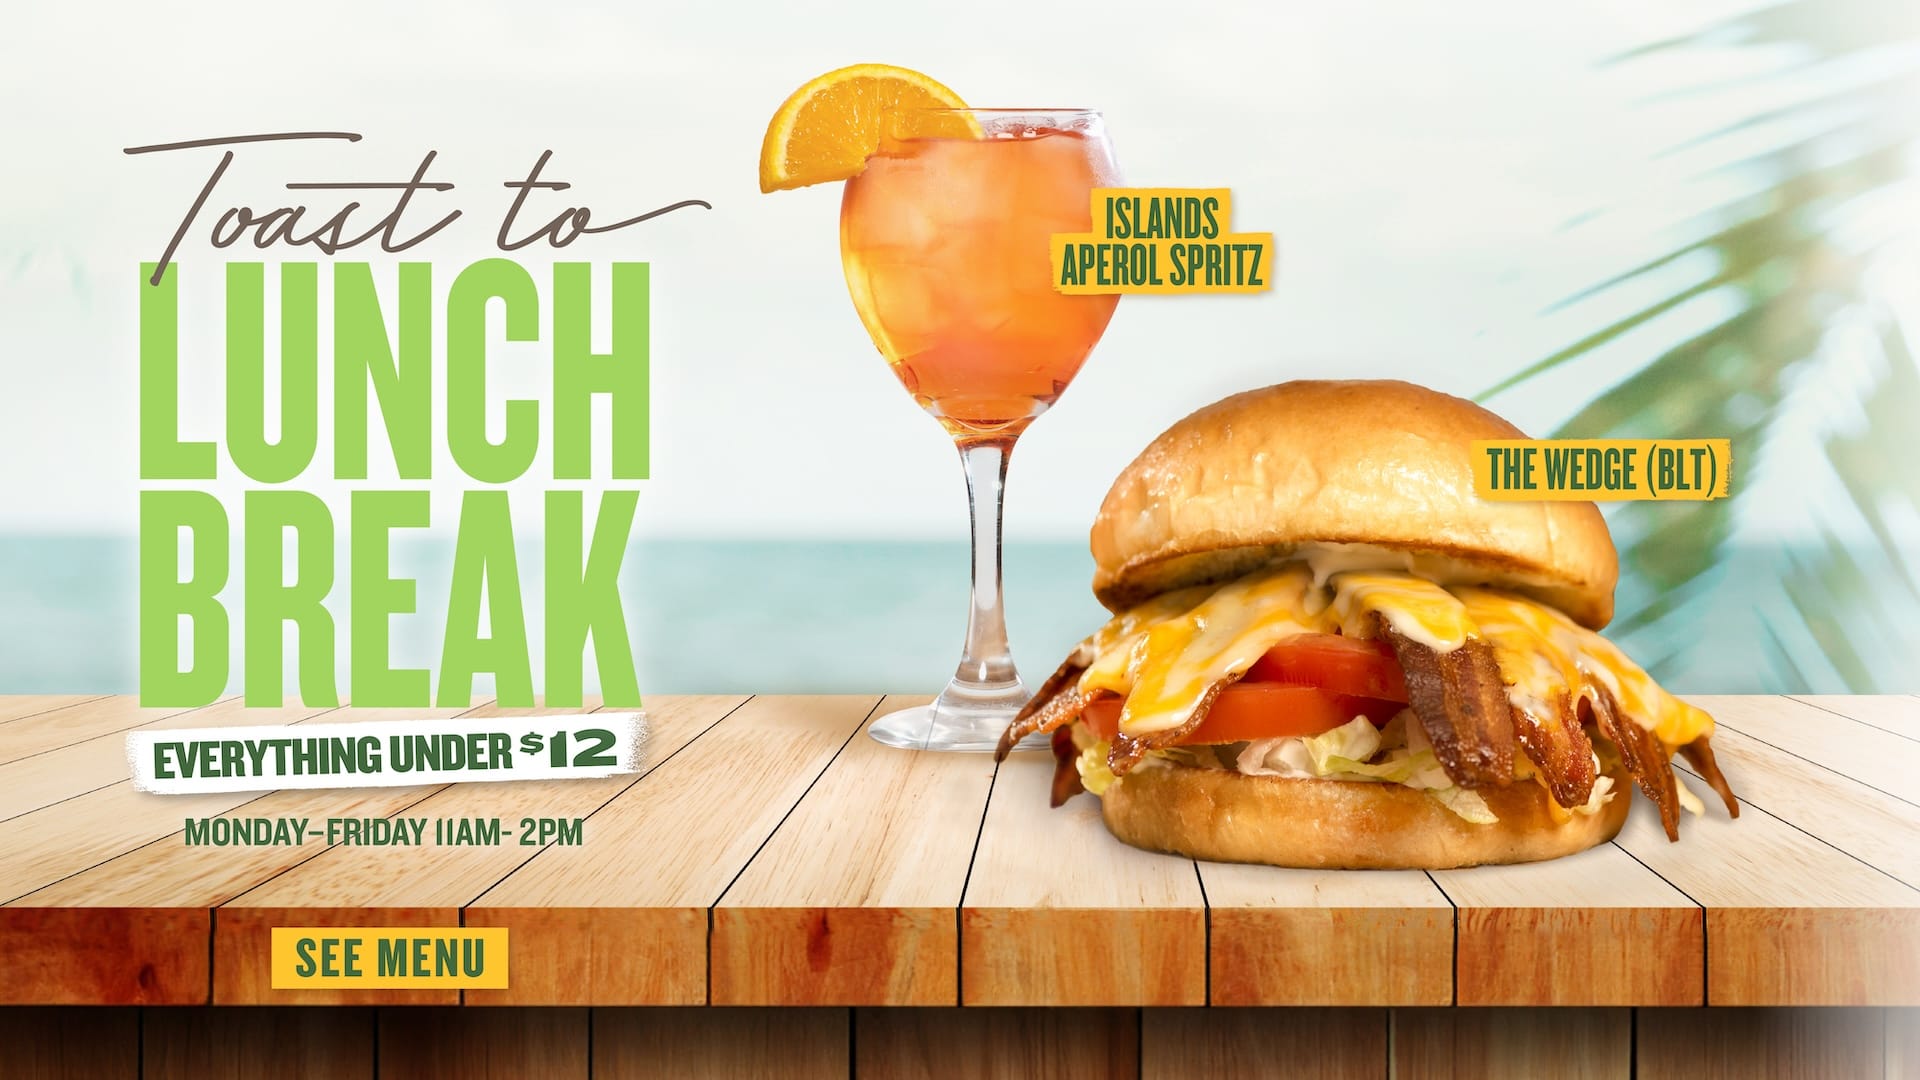 Toast to Lunch Break Everything under $12 - Monday through Friday 11am - 2pm - See Menu - Islands Aperol Spritz - The Wedge (BLT)